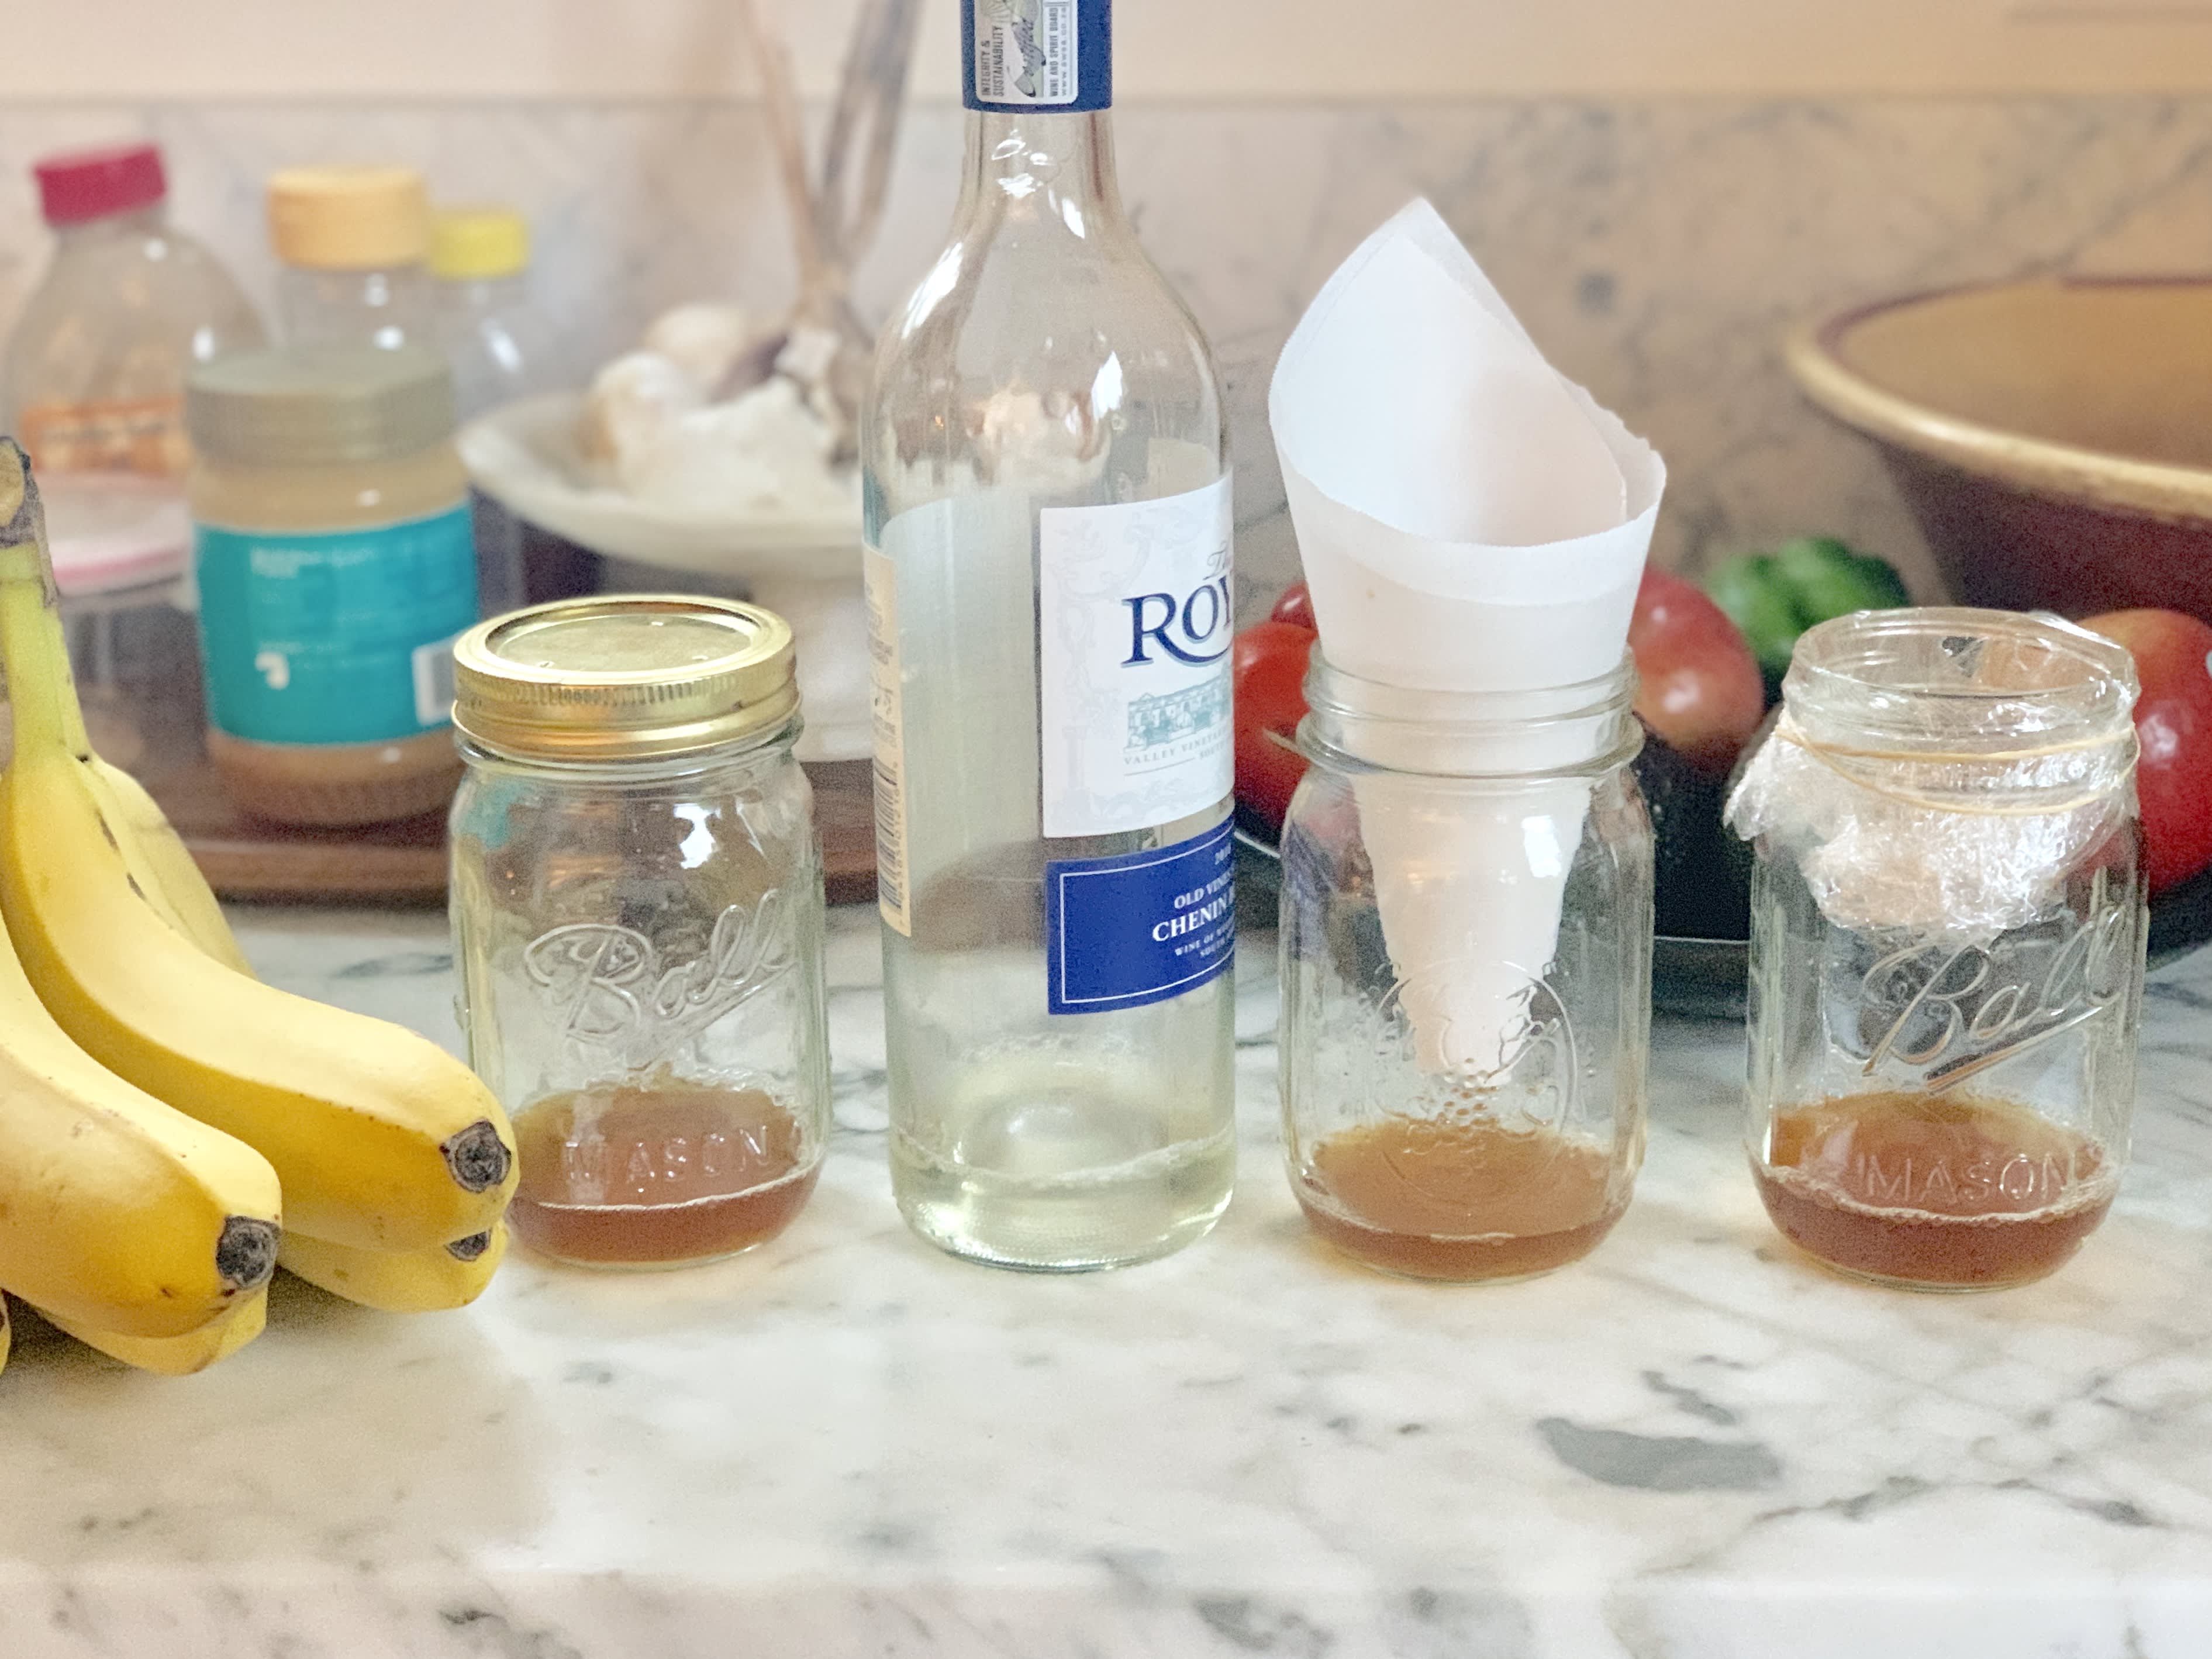 The Best Diy Fruit Fly Trap For Getting Rid Of Fruit Flies Kitchn,Twin Size Mattress Dimensions